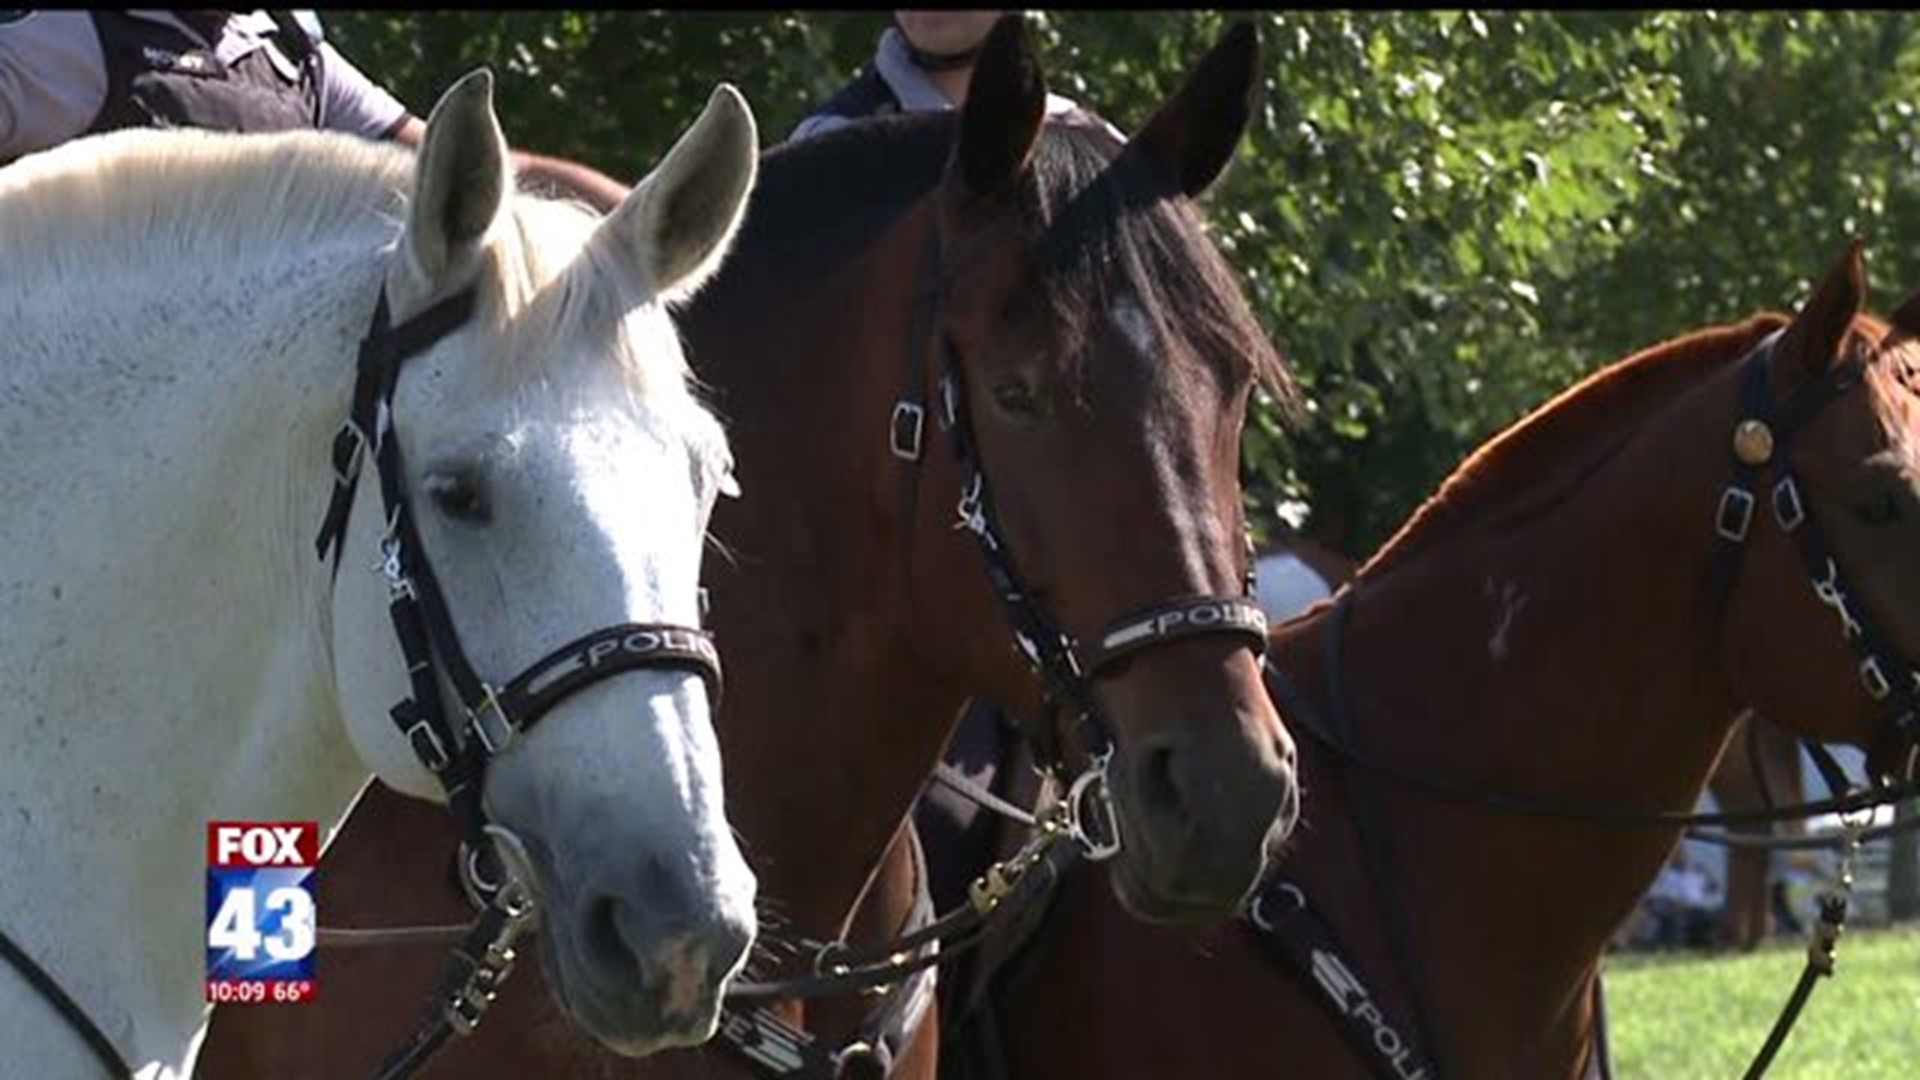 8th Annual Benefit Horse Show Helps Lancaster Mounted Patrols